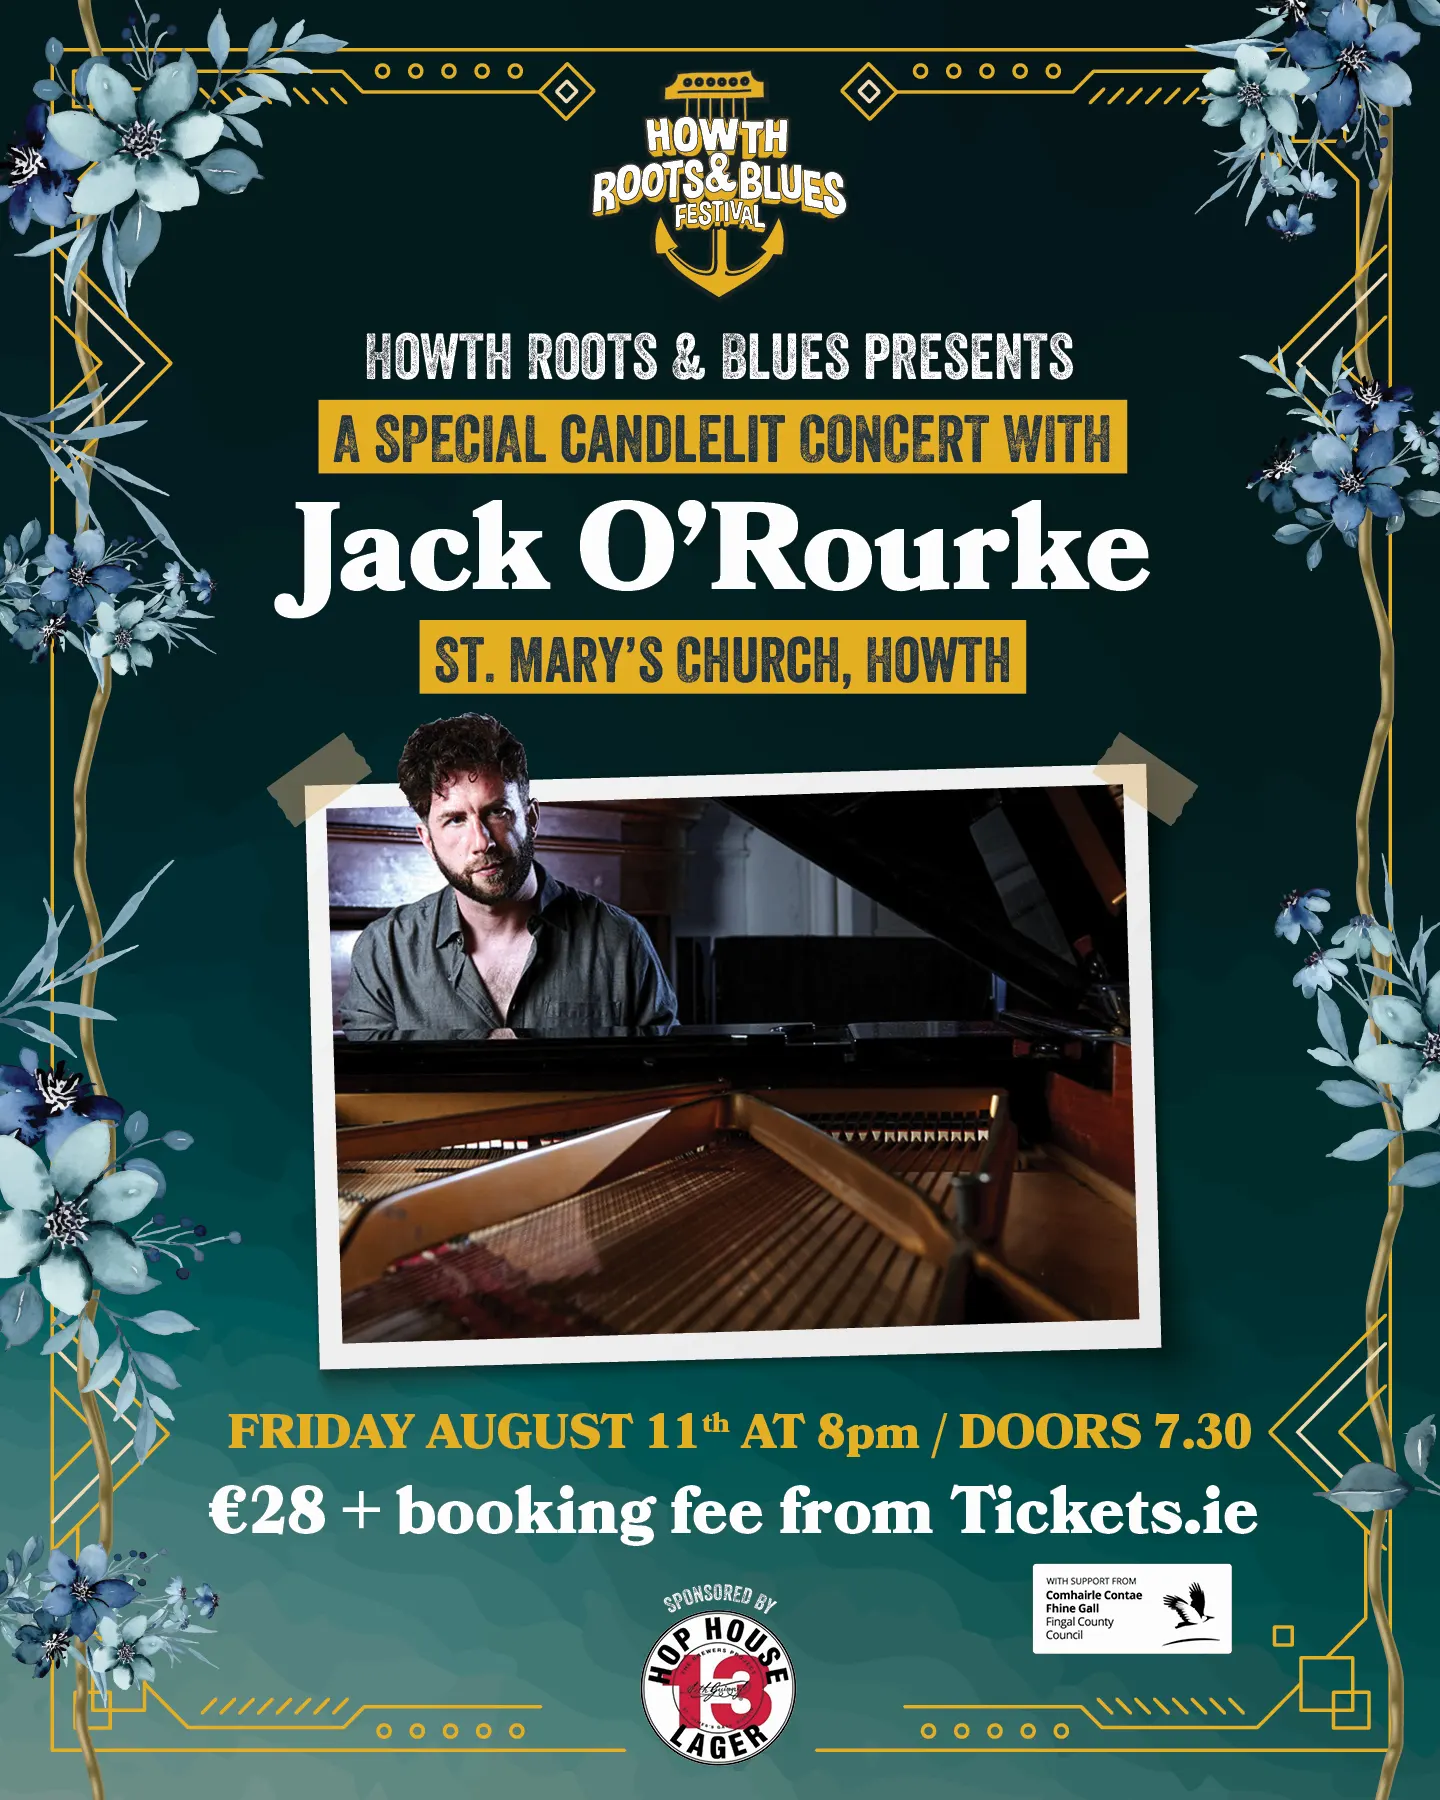 A Candlelit Concert with Jack O'Rourke